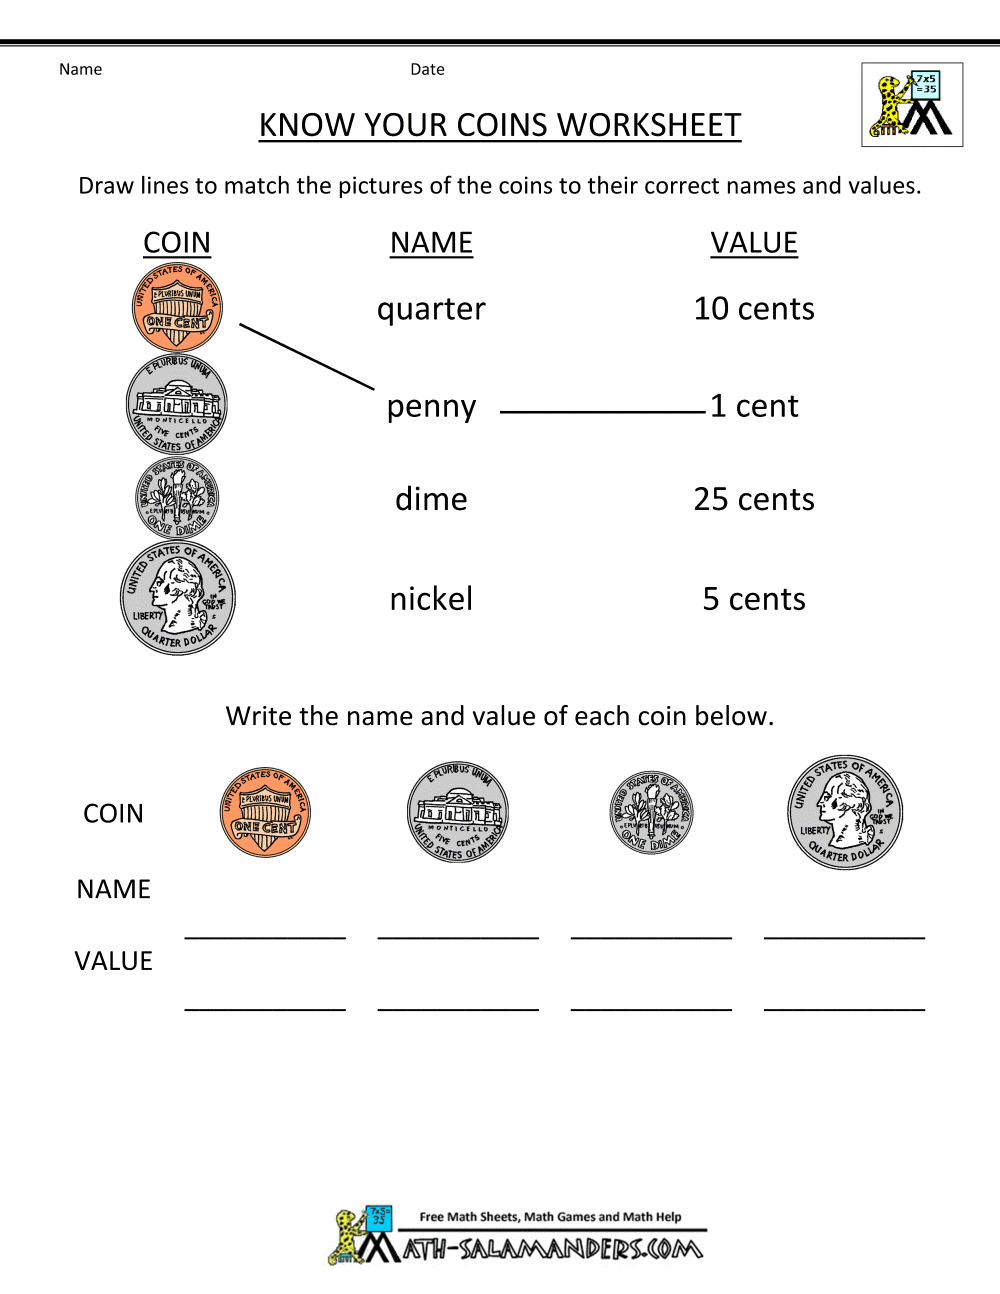 Could Be A Good Preassessment To See What Kids Know About Coins